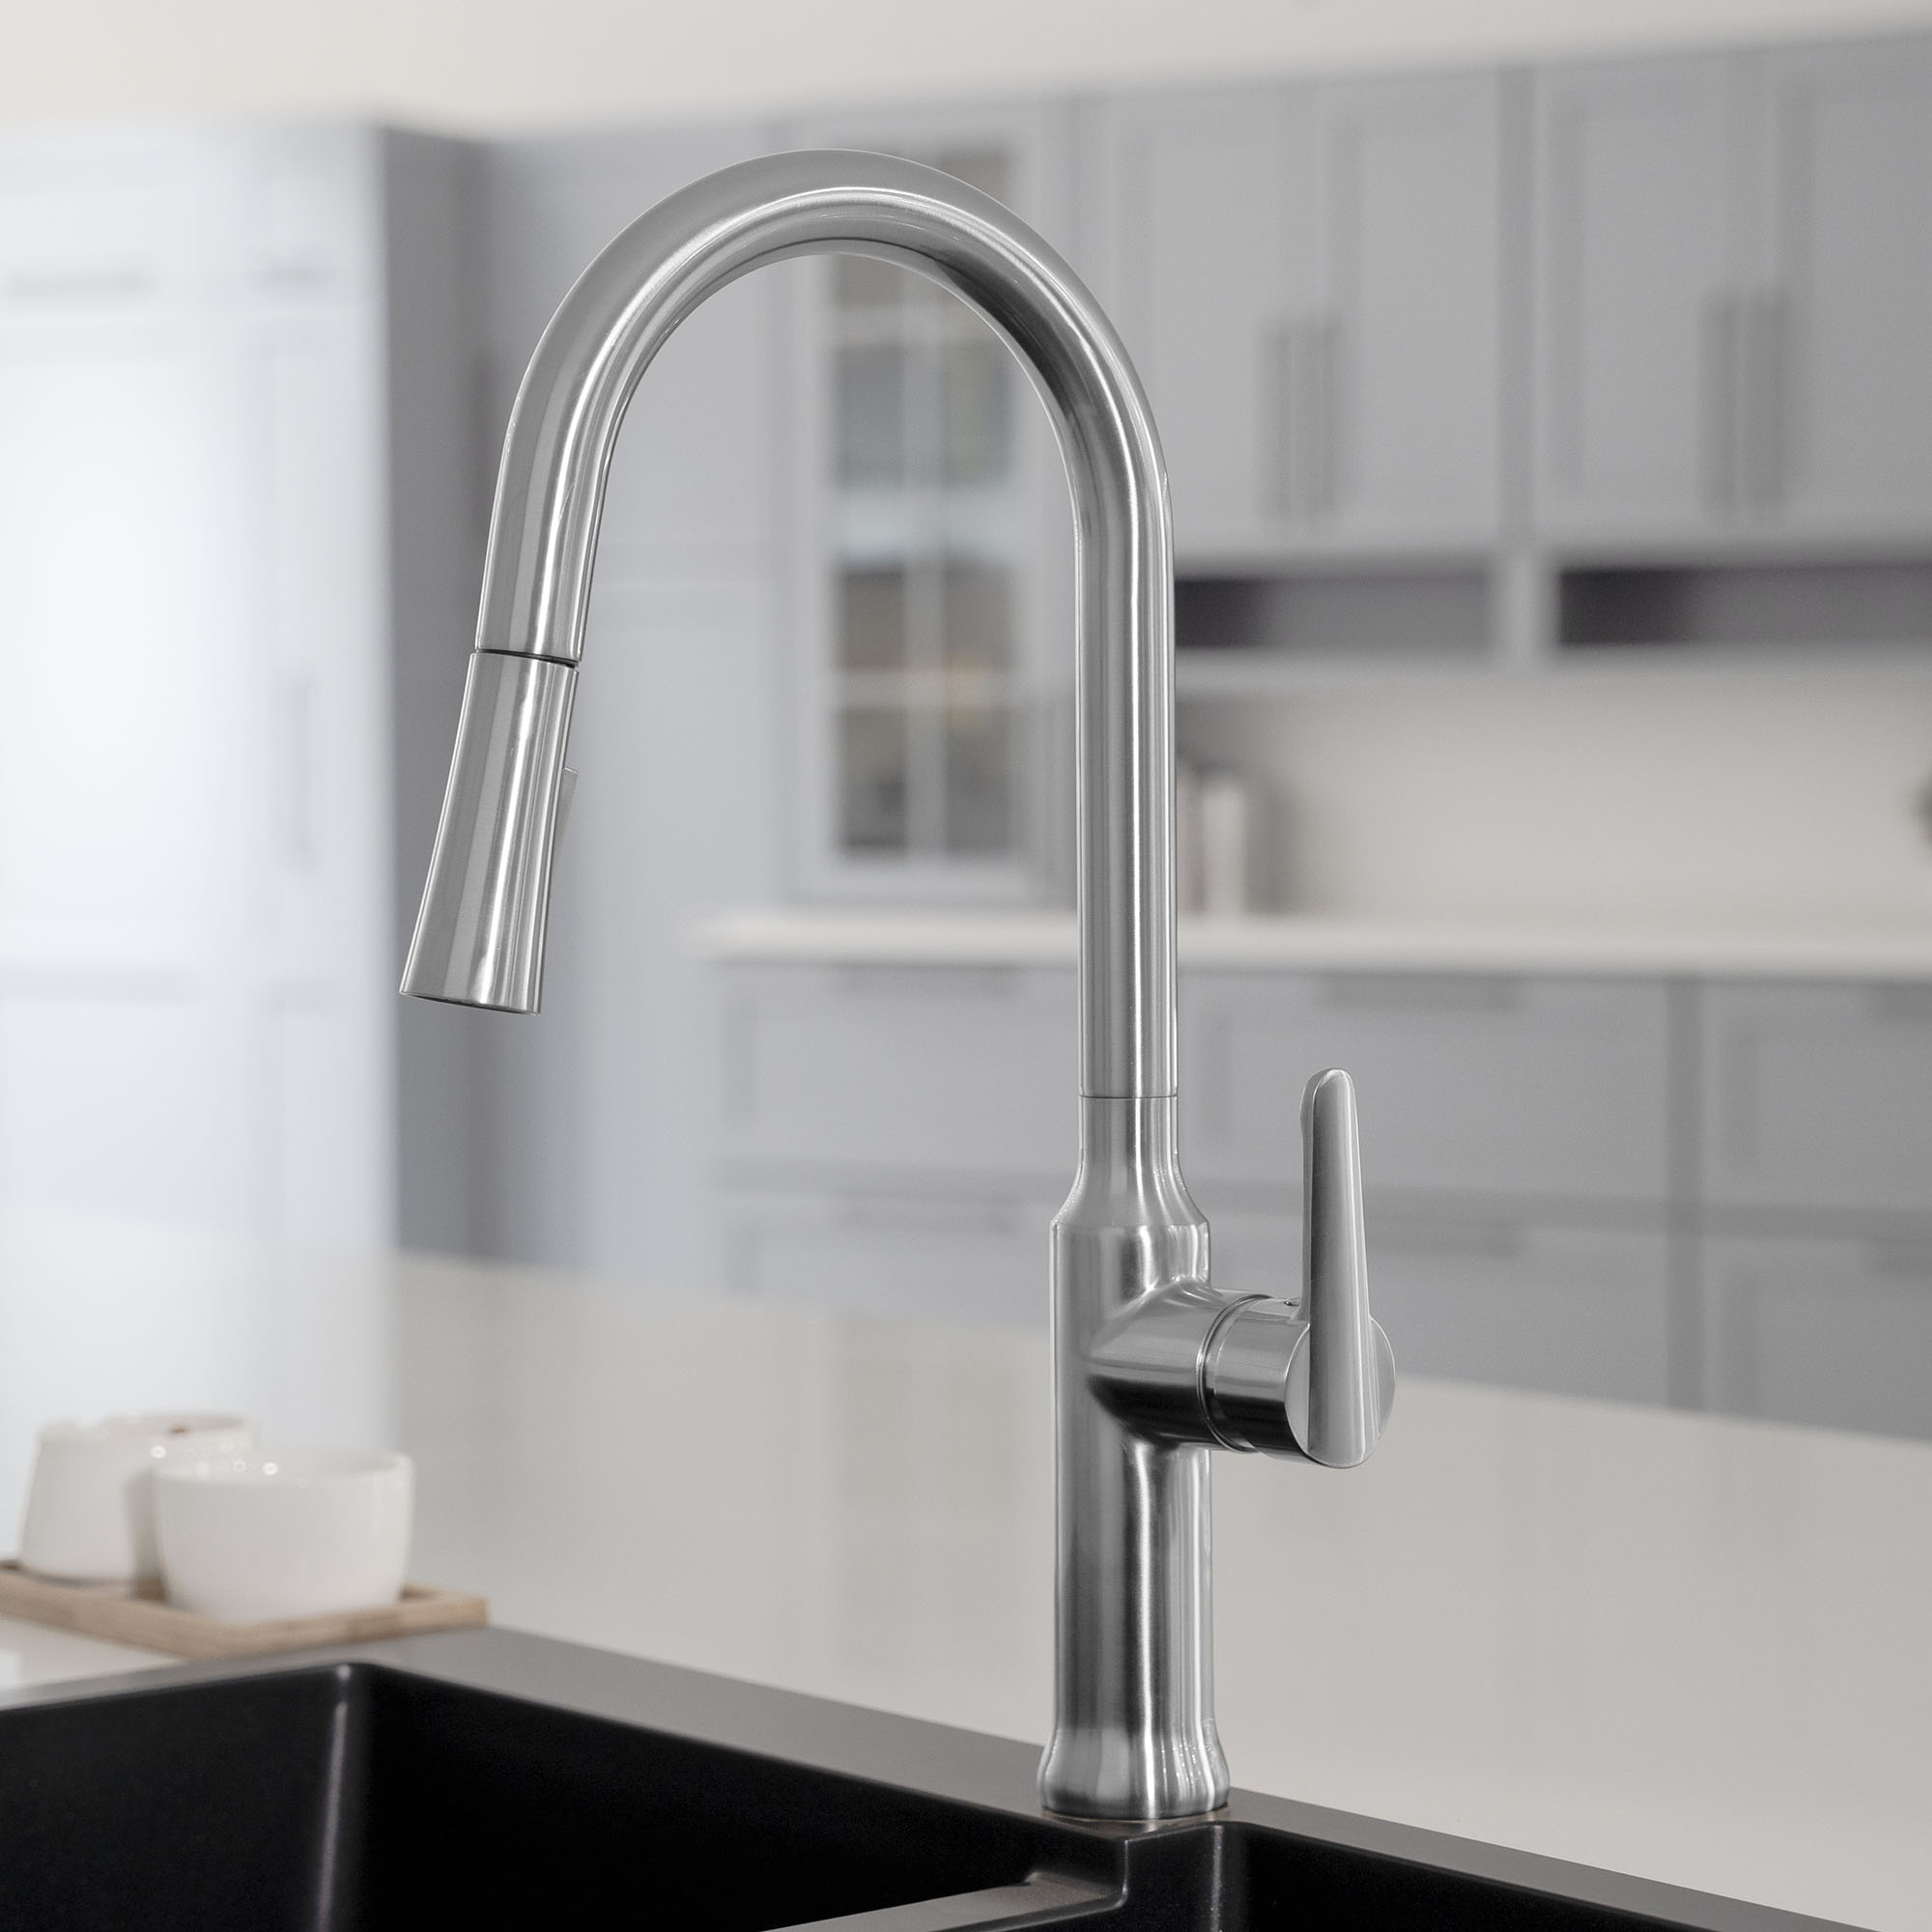 WOODBRIDGE WK030102CH Stainless Steel Single Handle Pre-Rinse Kitchen Faucet with Pull Down Sprayer, Chrome Finish